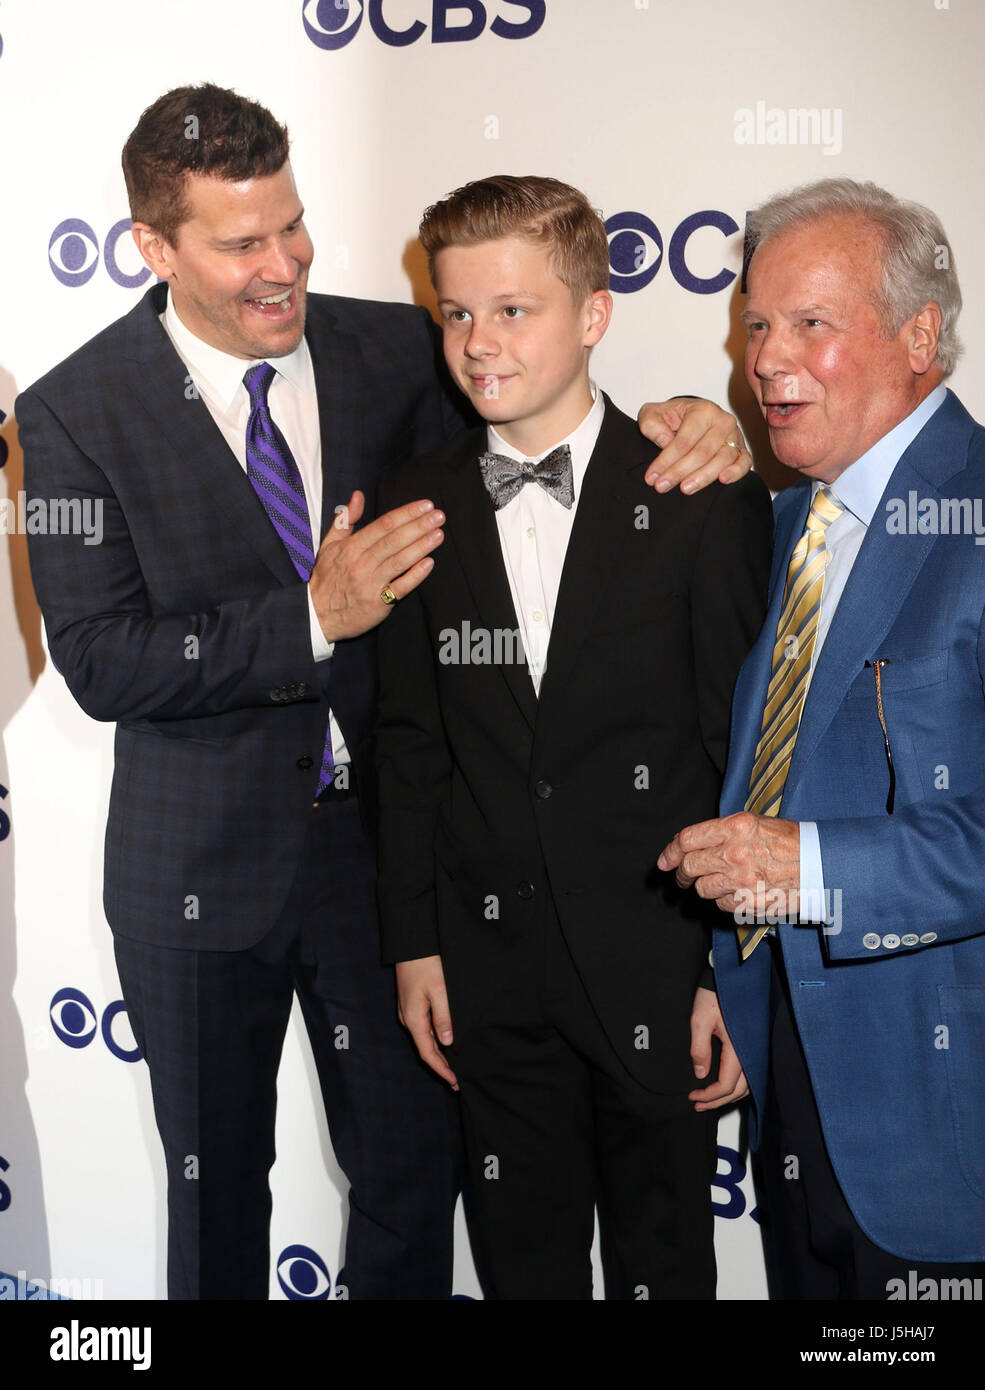 May 17, 2017 - New York, New York, U.S. - Actor DAVID BOREANAZ with his son  JAYDEN RAYNE BOREANAZ and his father DAVE ROBERTS attend the 2017 CBS  Upfront held at the